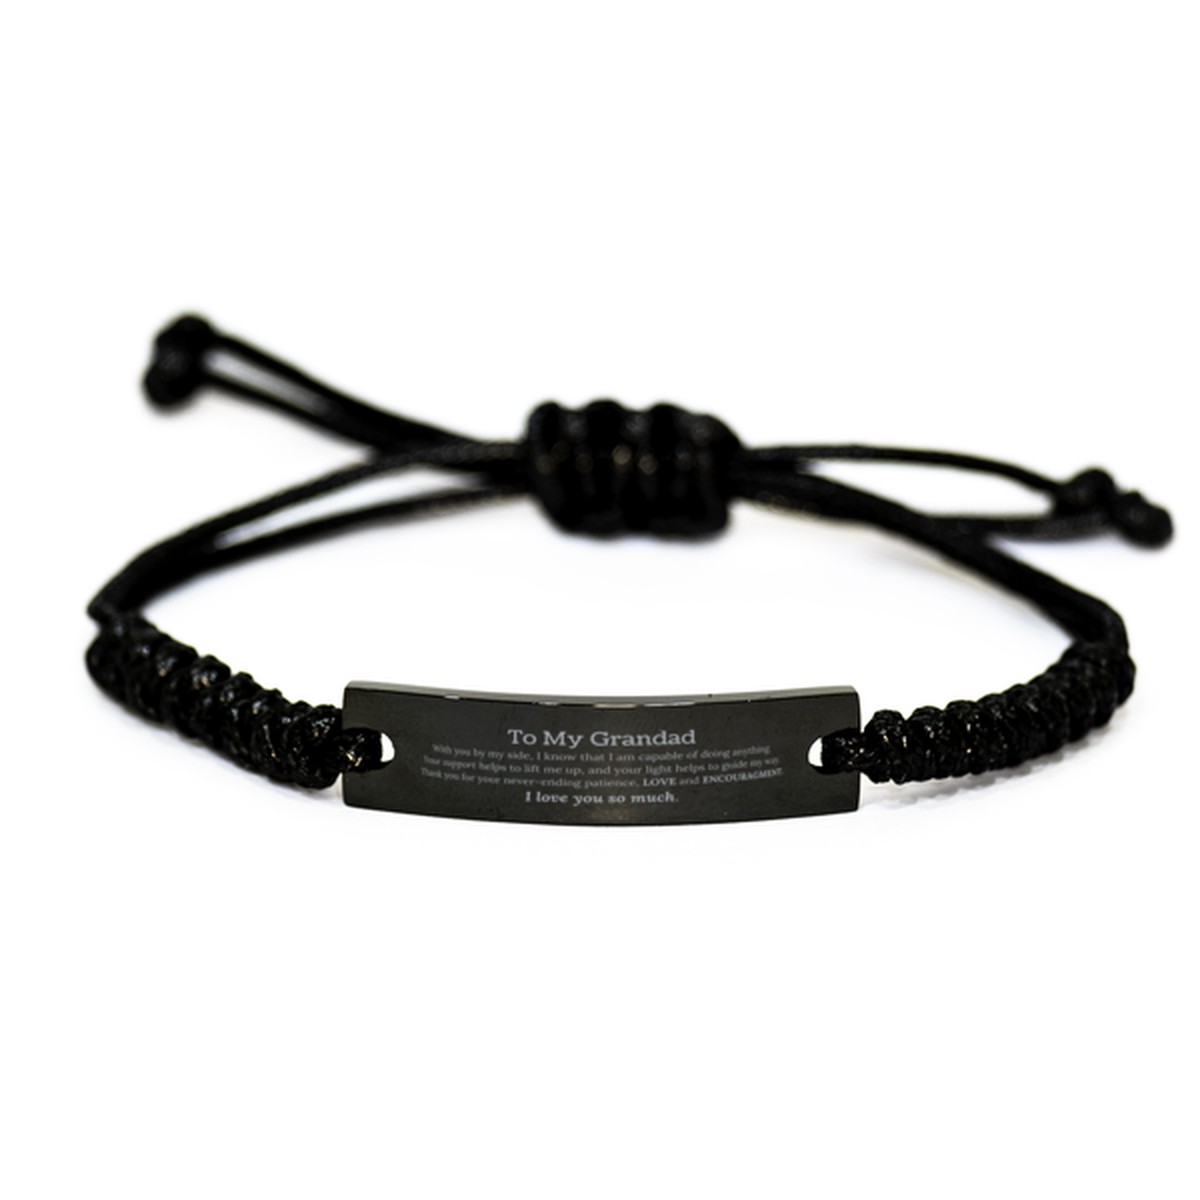 Appreciation Grandad Black Rope Bracelet Gifts, To My Grandad Birthday Christmas Wedding Keepsake Gifts for Grandad With you by my side, I know that I am capable of doing anything. I love you so much